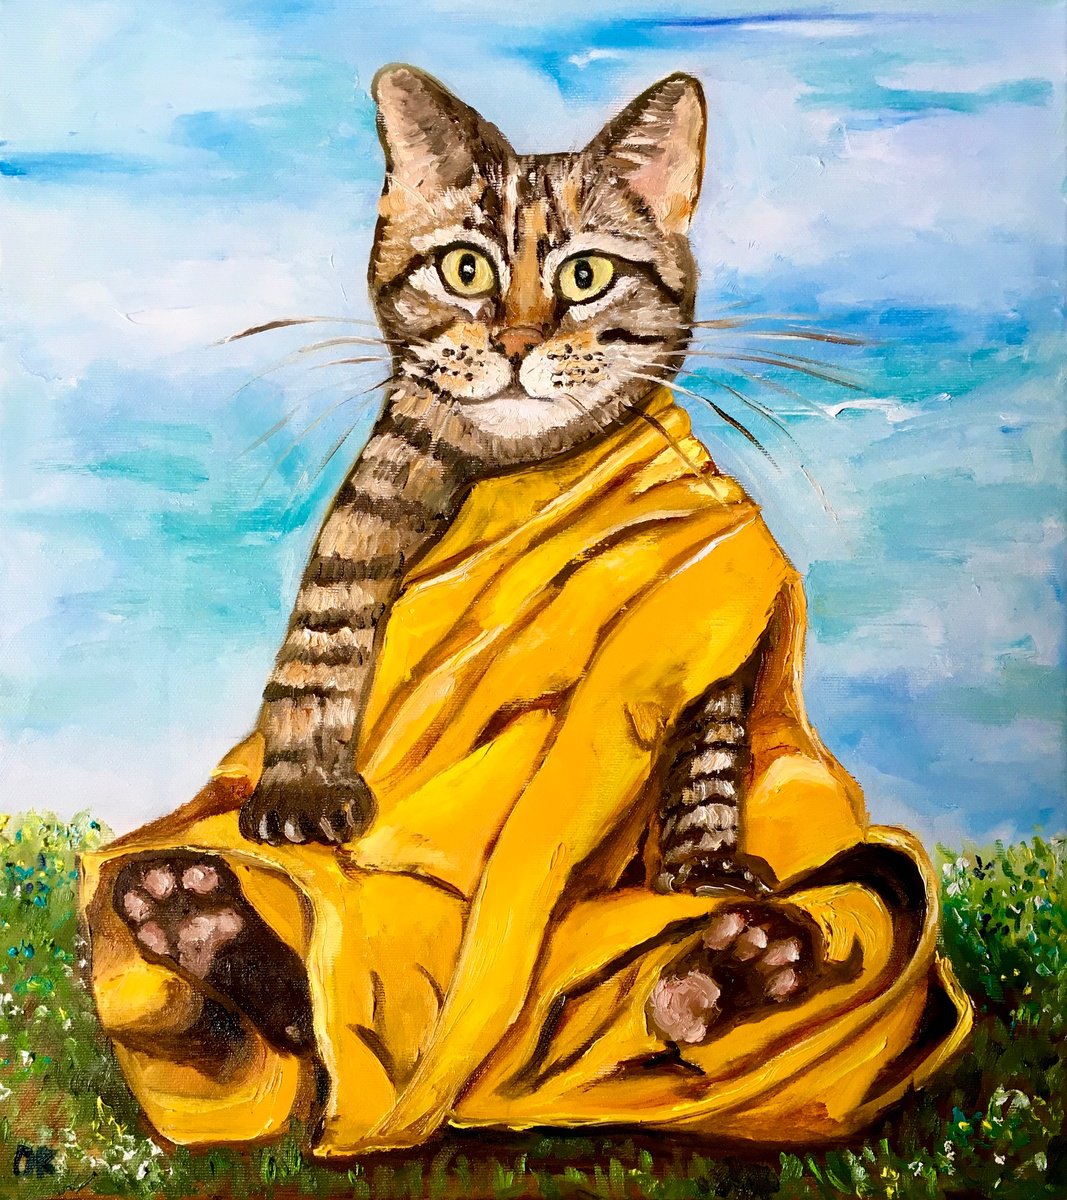 Buddhist cat bringing peace and tranquility of mind. by Olga Koval